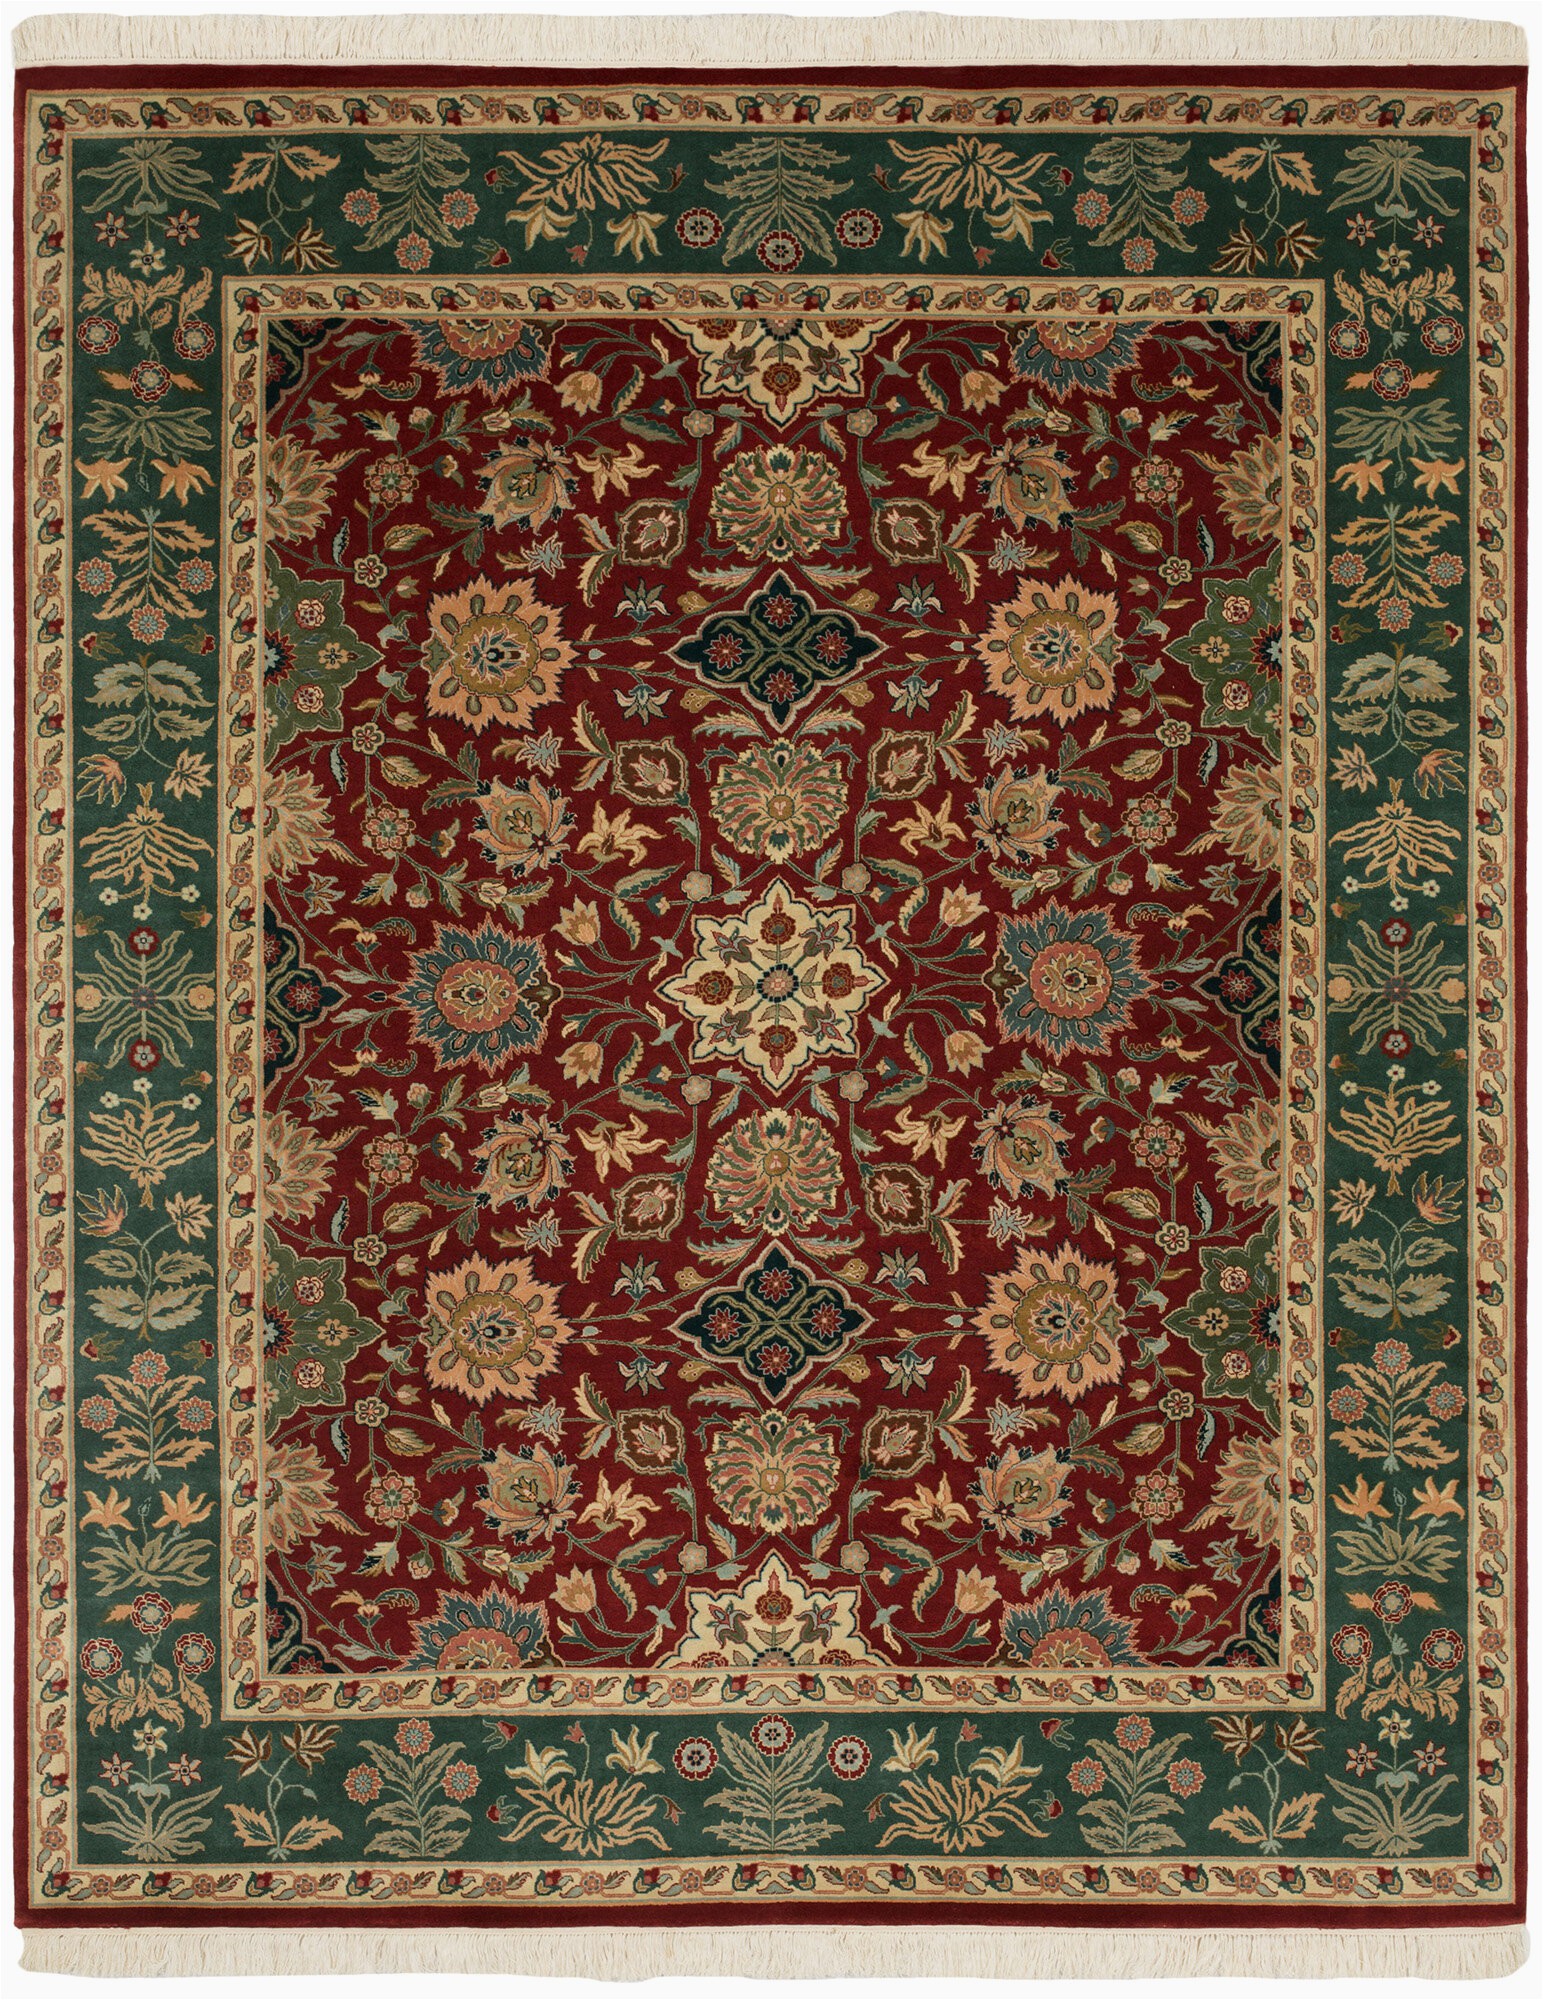 Green and Red area Rugs Ava Hand Knotted Wool Green Red Cream area Rug